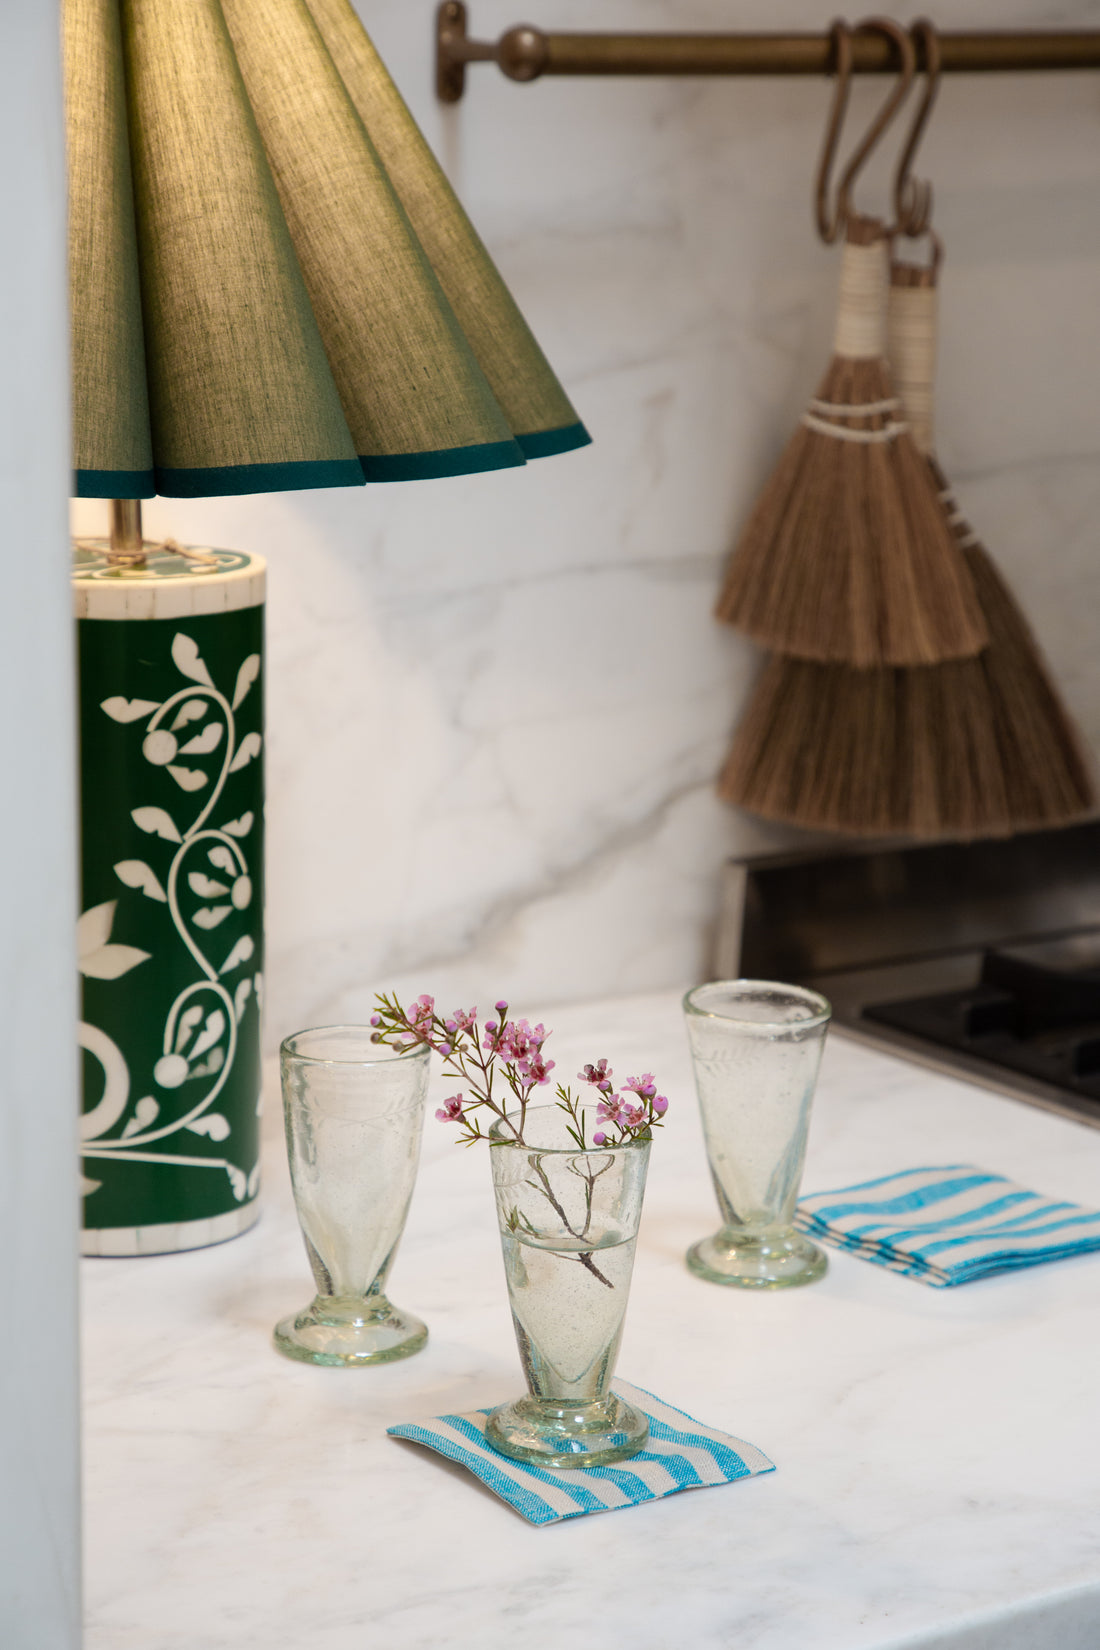 Green Inlay Lamps With Handmade Monochromatic Green Linen Shades